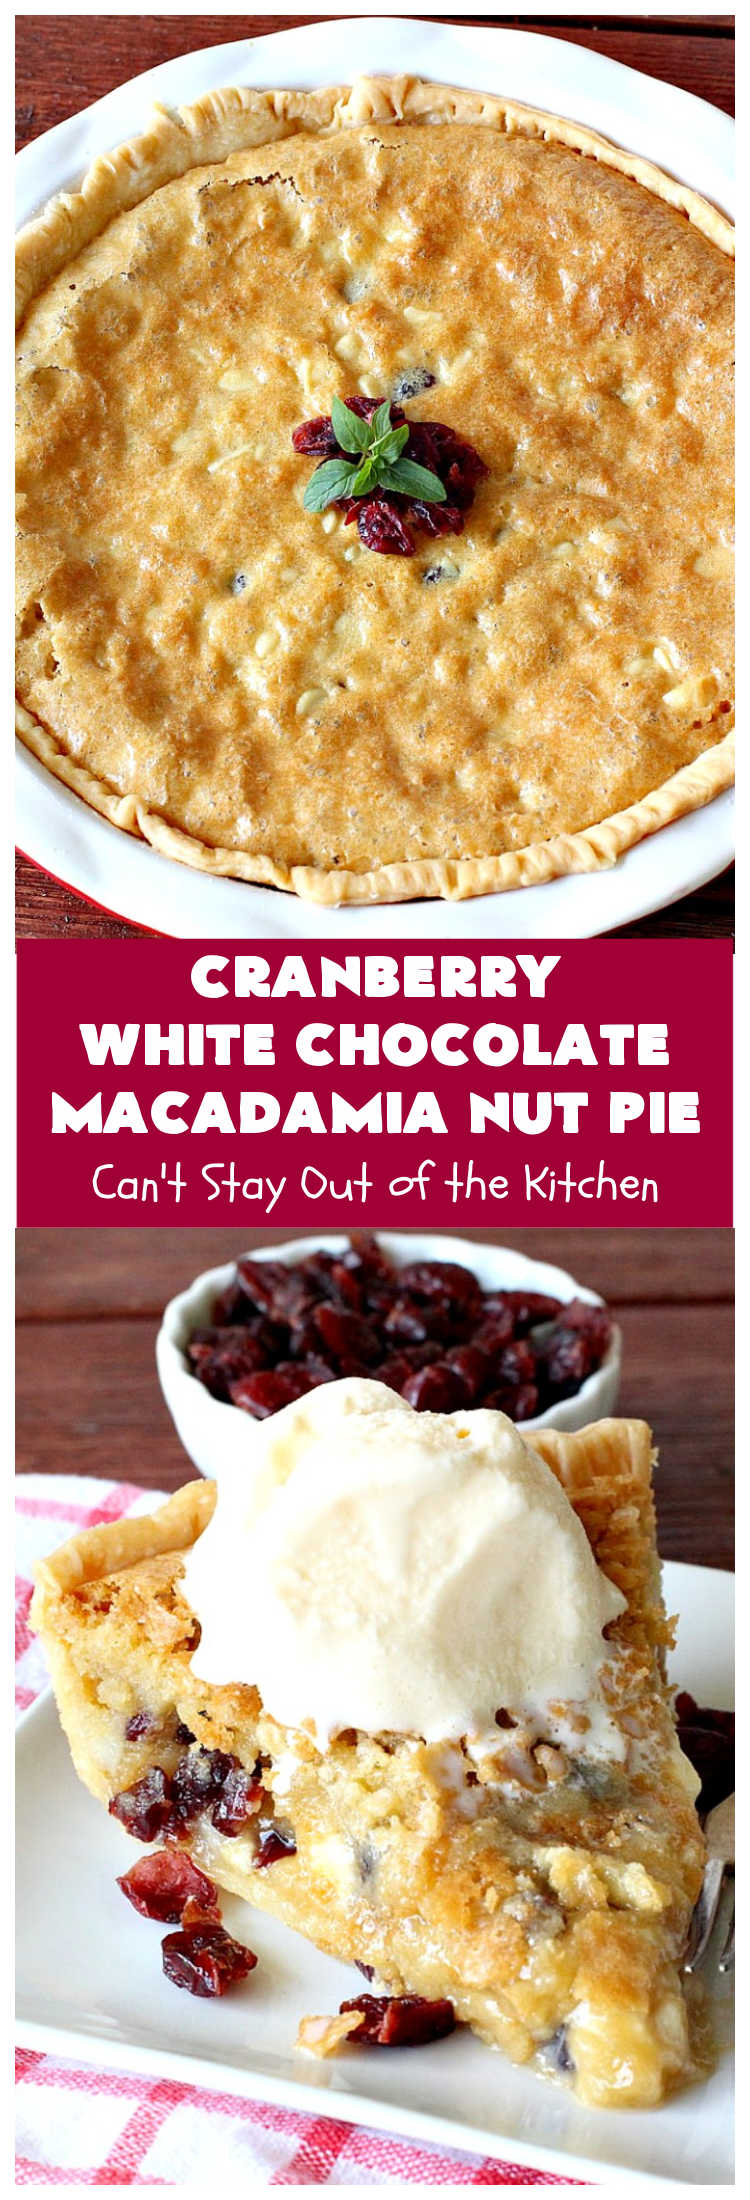 Cranberry White Chocolate Macadamia Nut Pie | Can't Stay Out of the Kitchen | this irresistible #pie is made with dried #cranberries, #MacadamiaNuts & #WhiteChocolateChips. It's so rich & decadent you'll be hooked from your first bite. Wonderful for #holiday parties and #Christmas dinner menus. #chocolate #dessert #Craisins #HolidayDessert #ChocolateDessert #CranberryDessert #CranberryWhiteChocolateMacadamiaNutPie